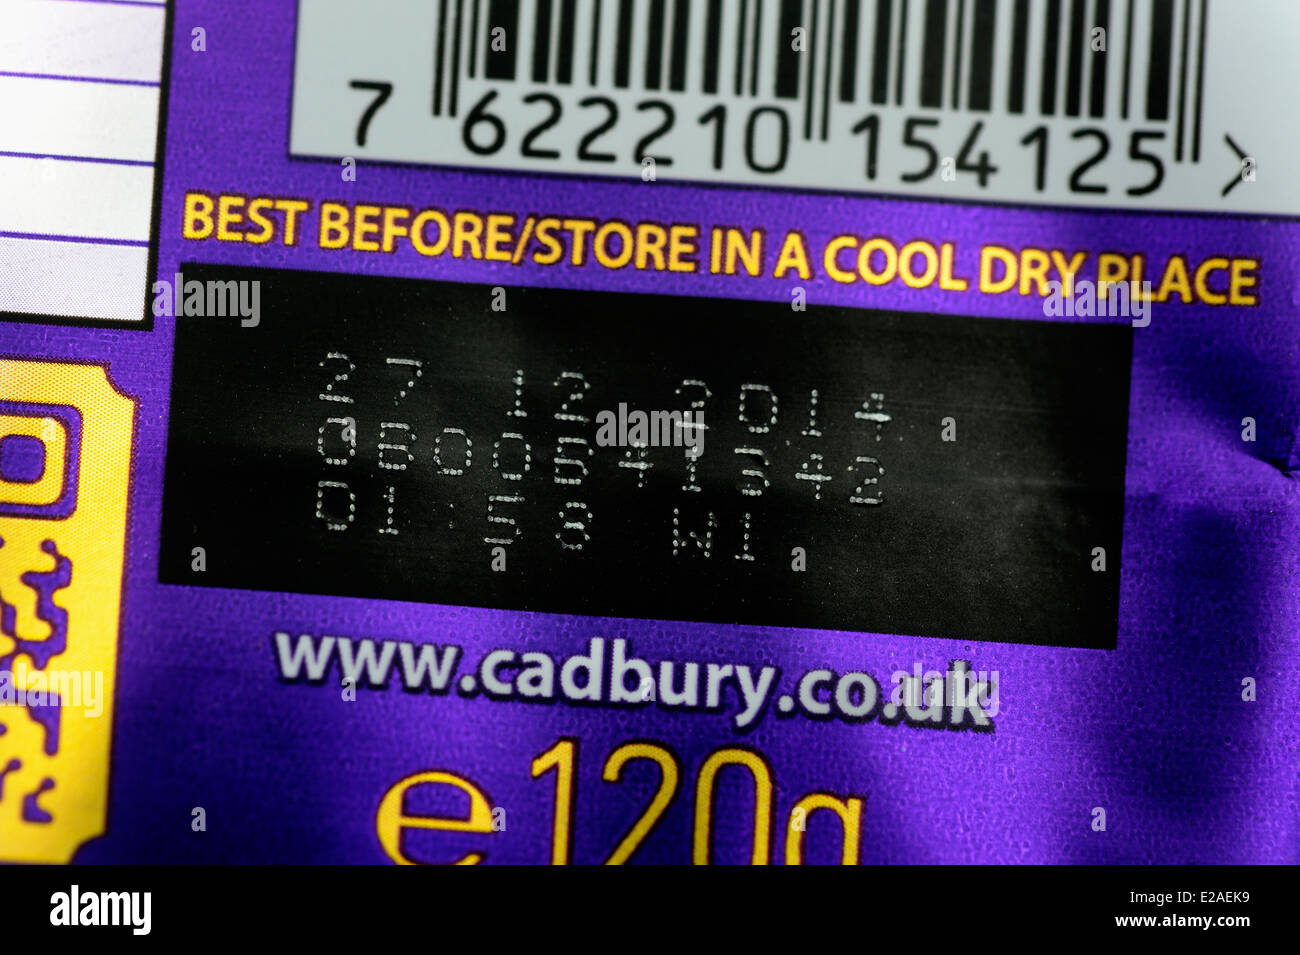 Bar code and best before date code on a bar of Cadbury's Chocolate Stock Photo